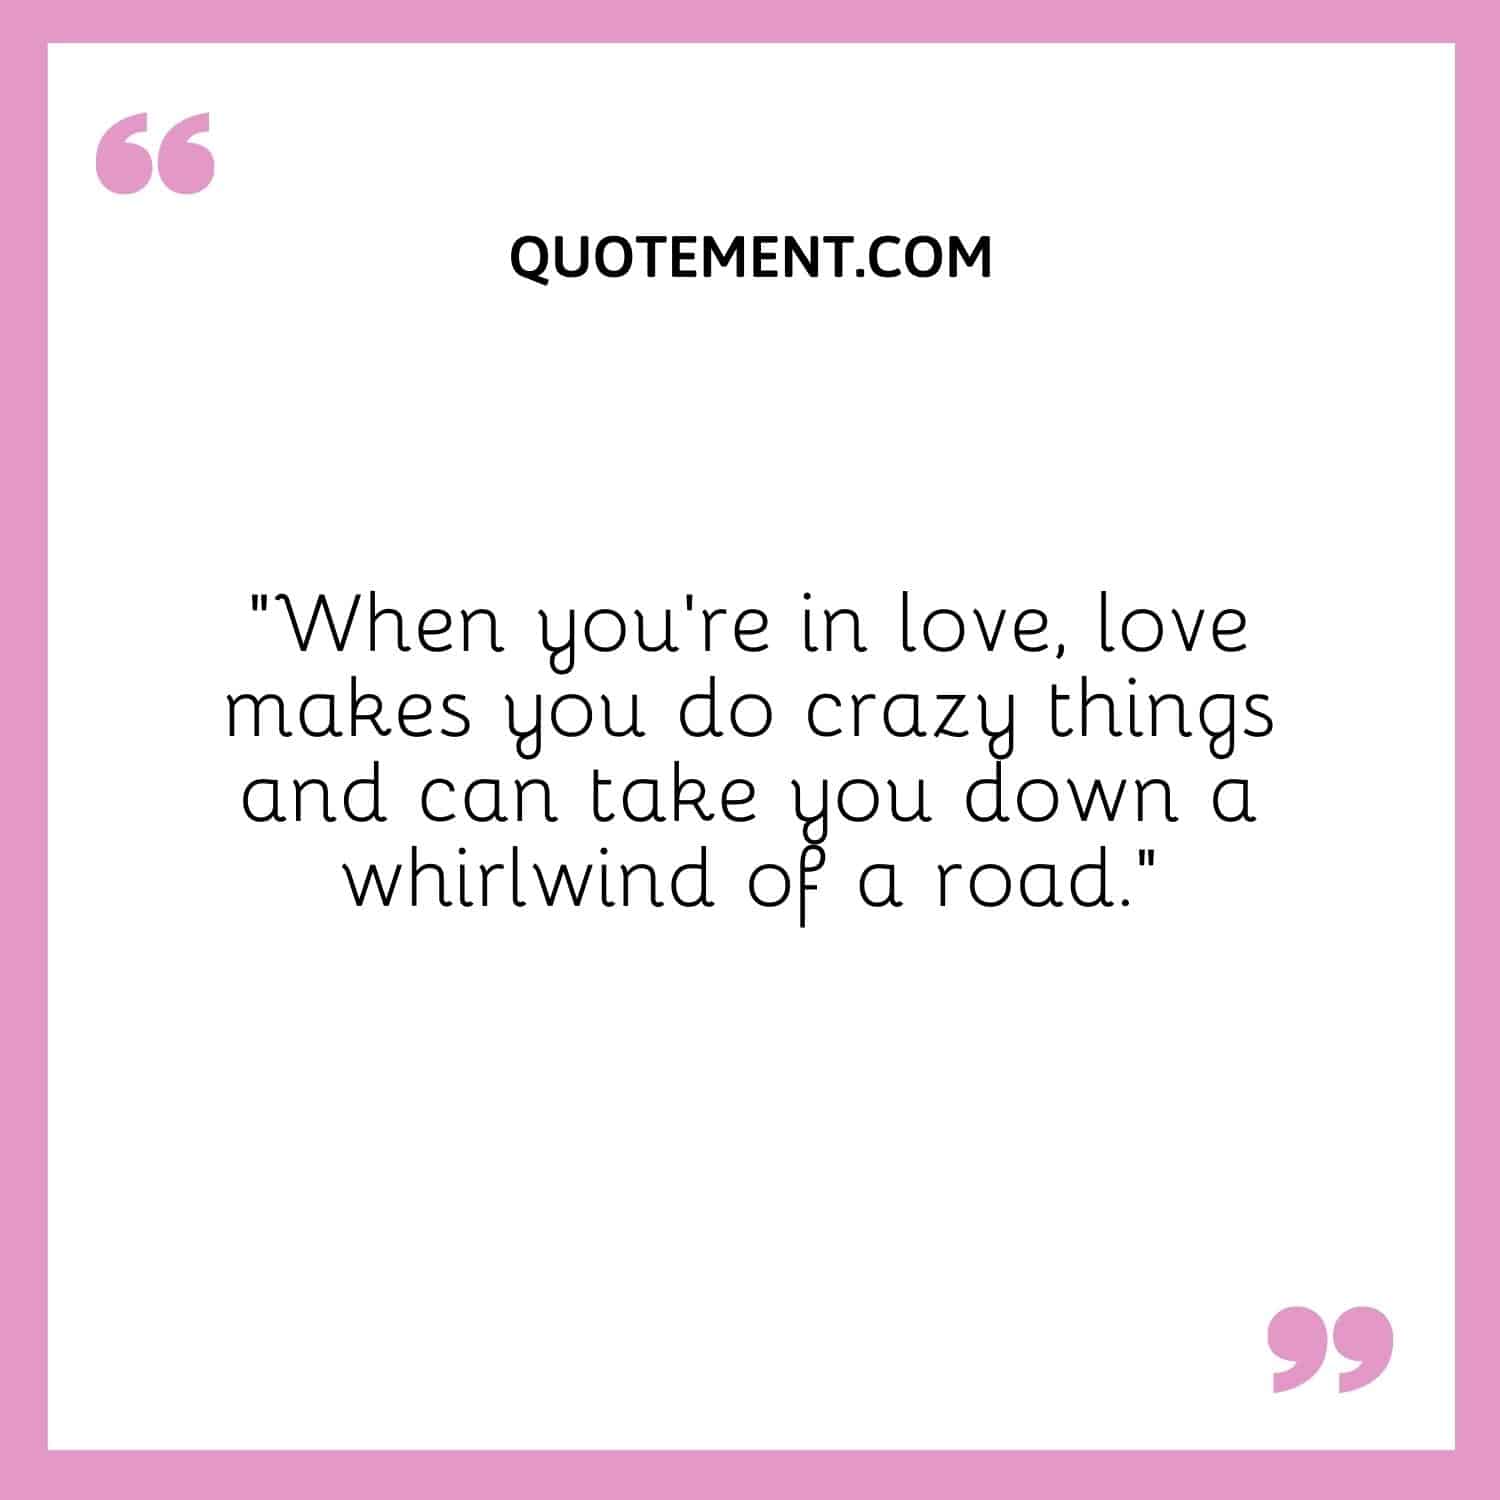 love makes you do crazy things